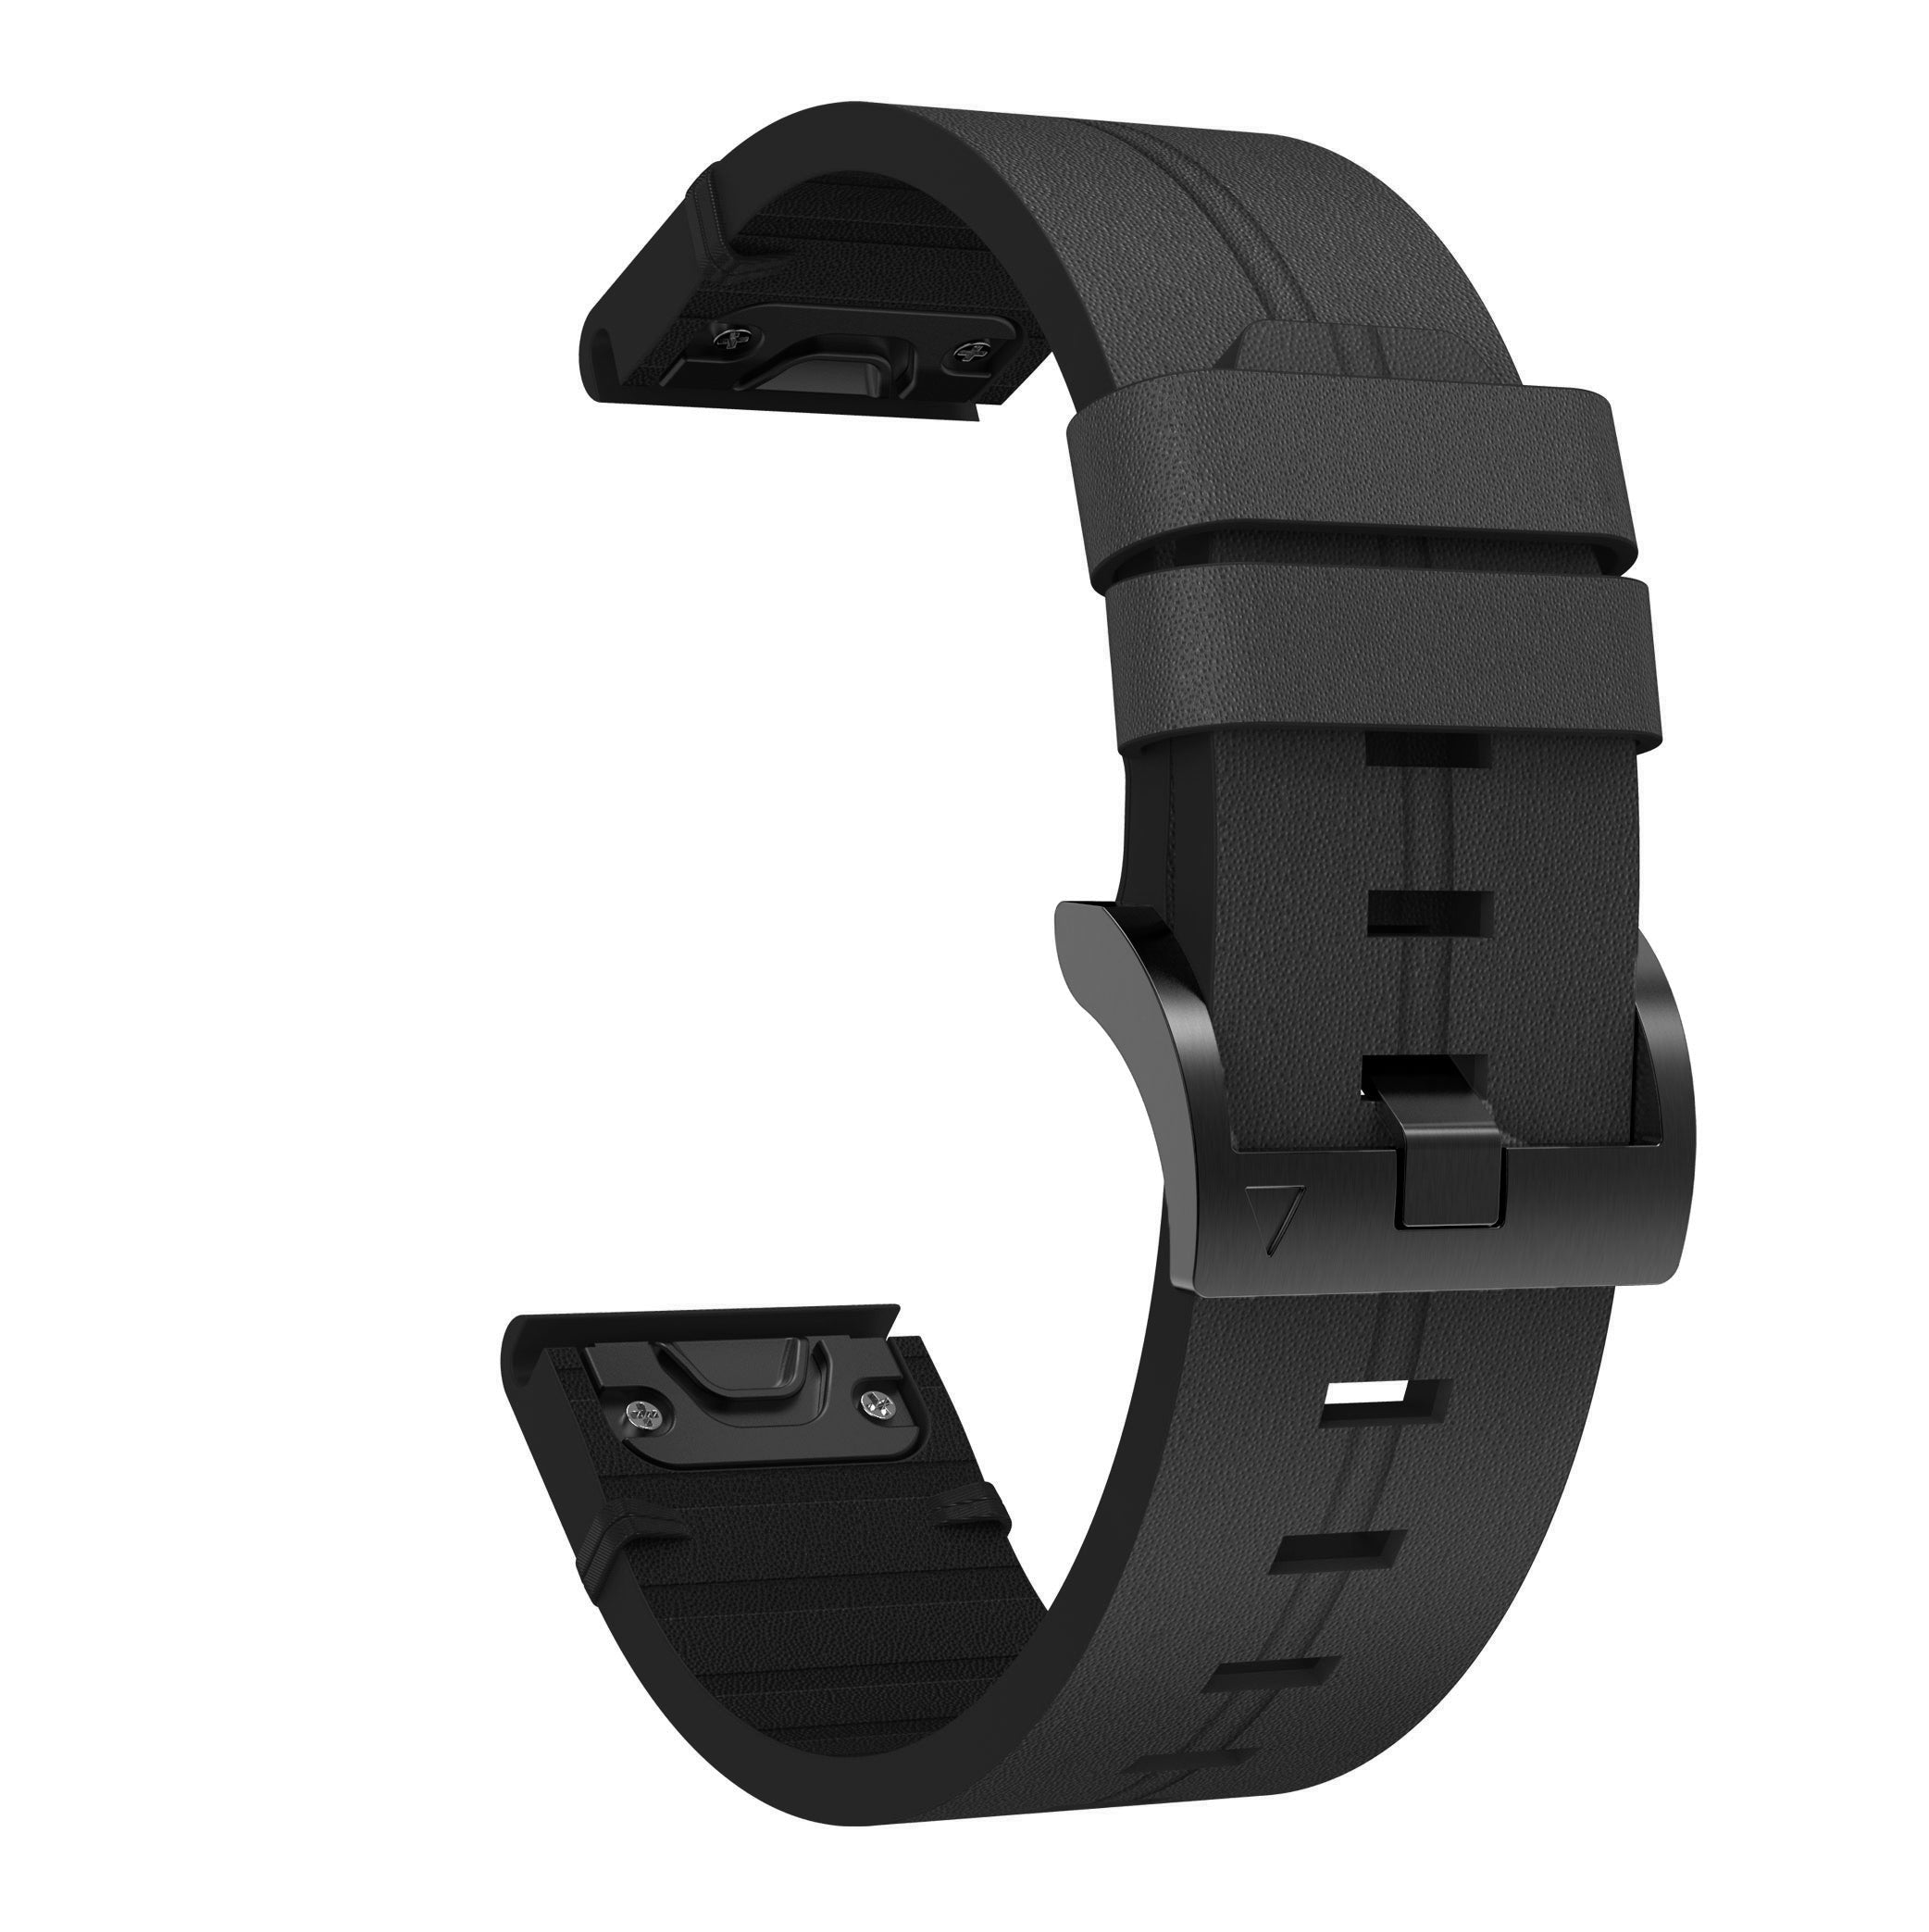 For Garmin Fenix 6S Genuine Leather Smart Watch Band Adjustable Replacement Strap - Black